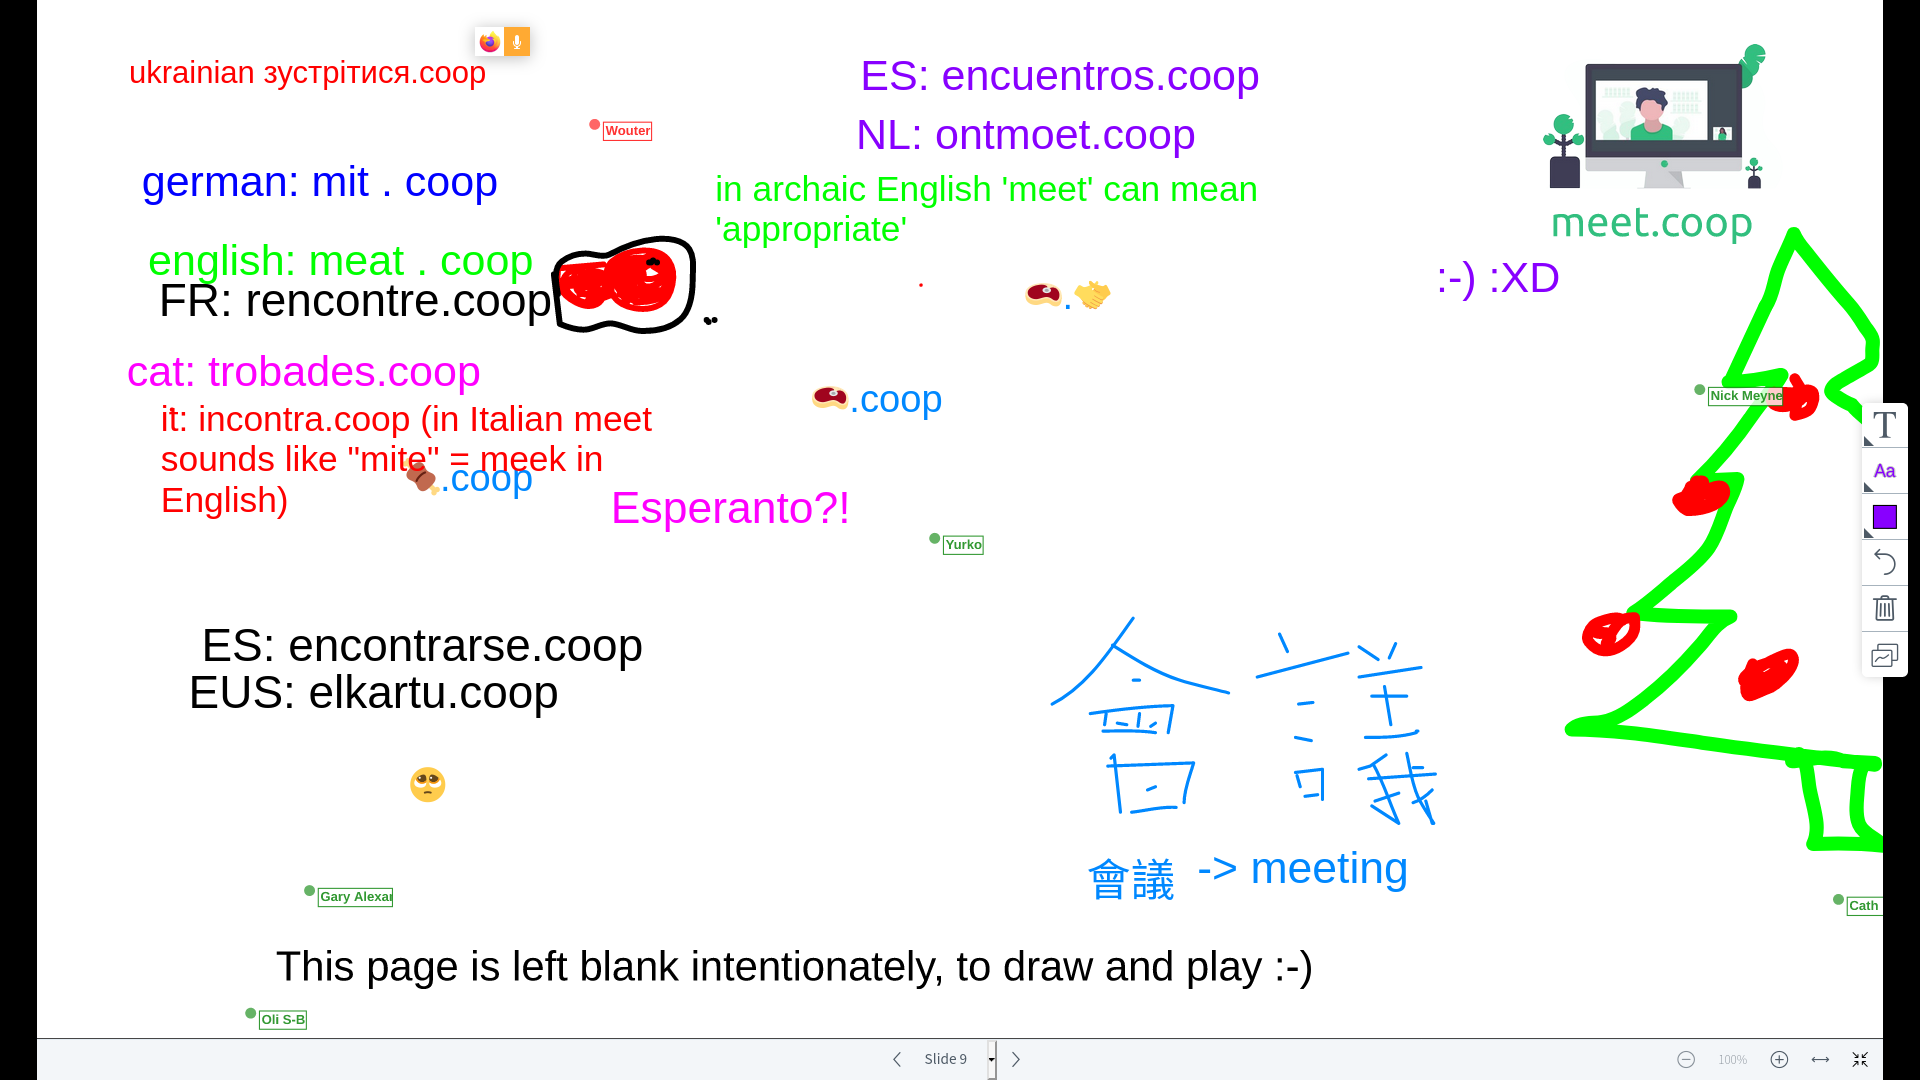 Xmas-Party-translate-meet.coop-whiteboard-2020-12-11 18-22-49